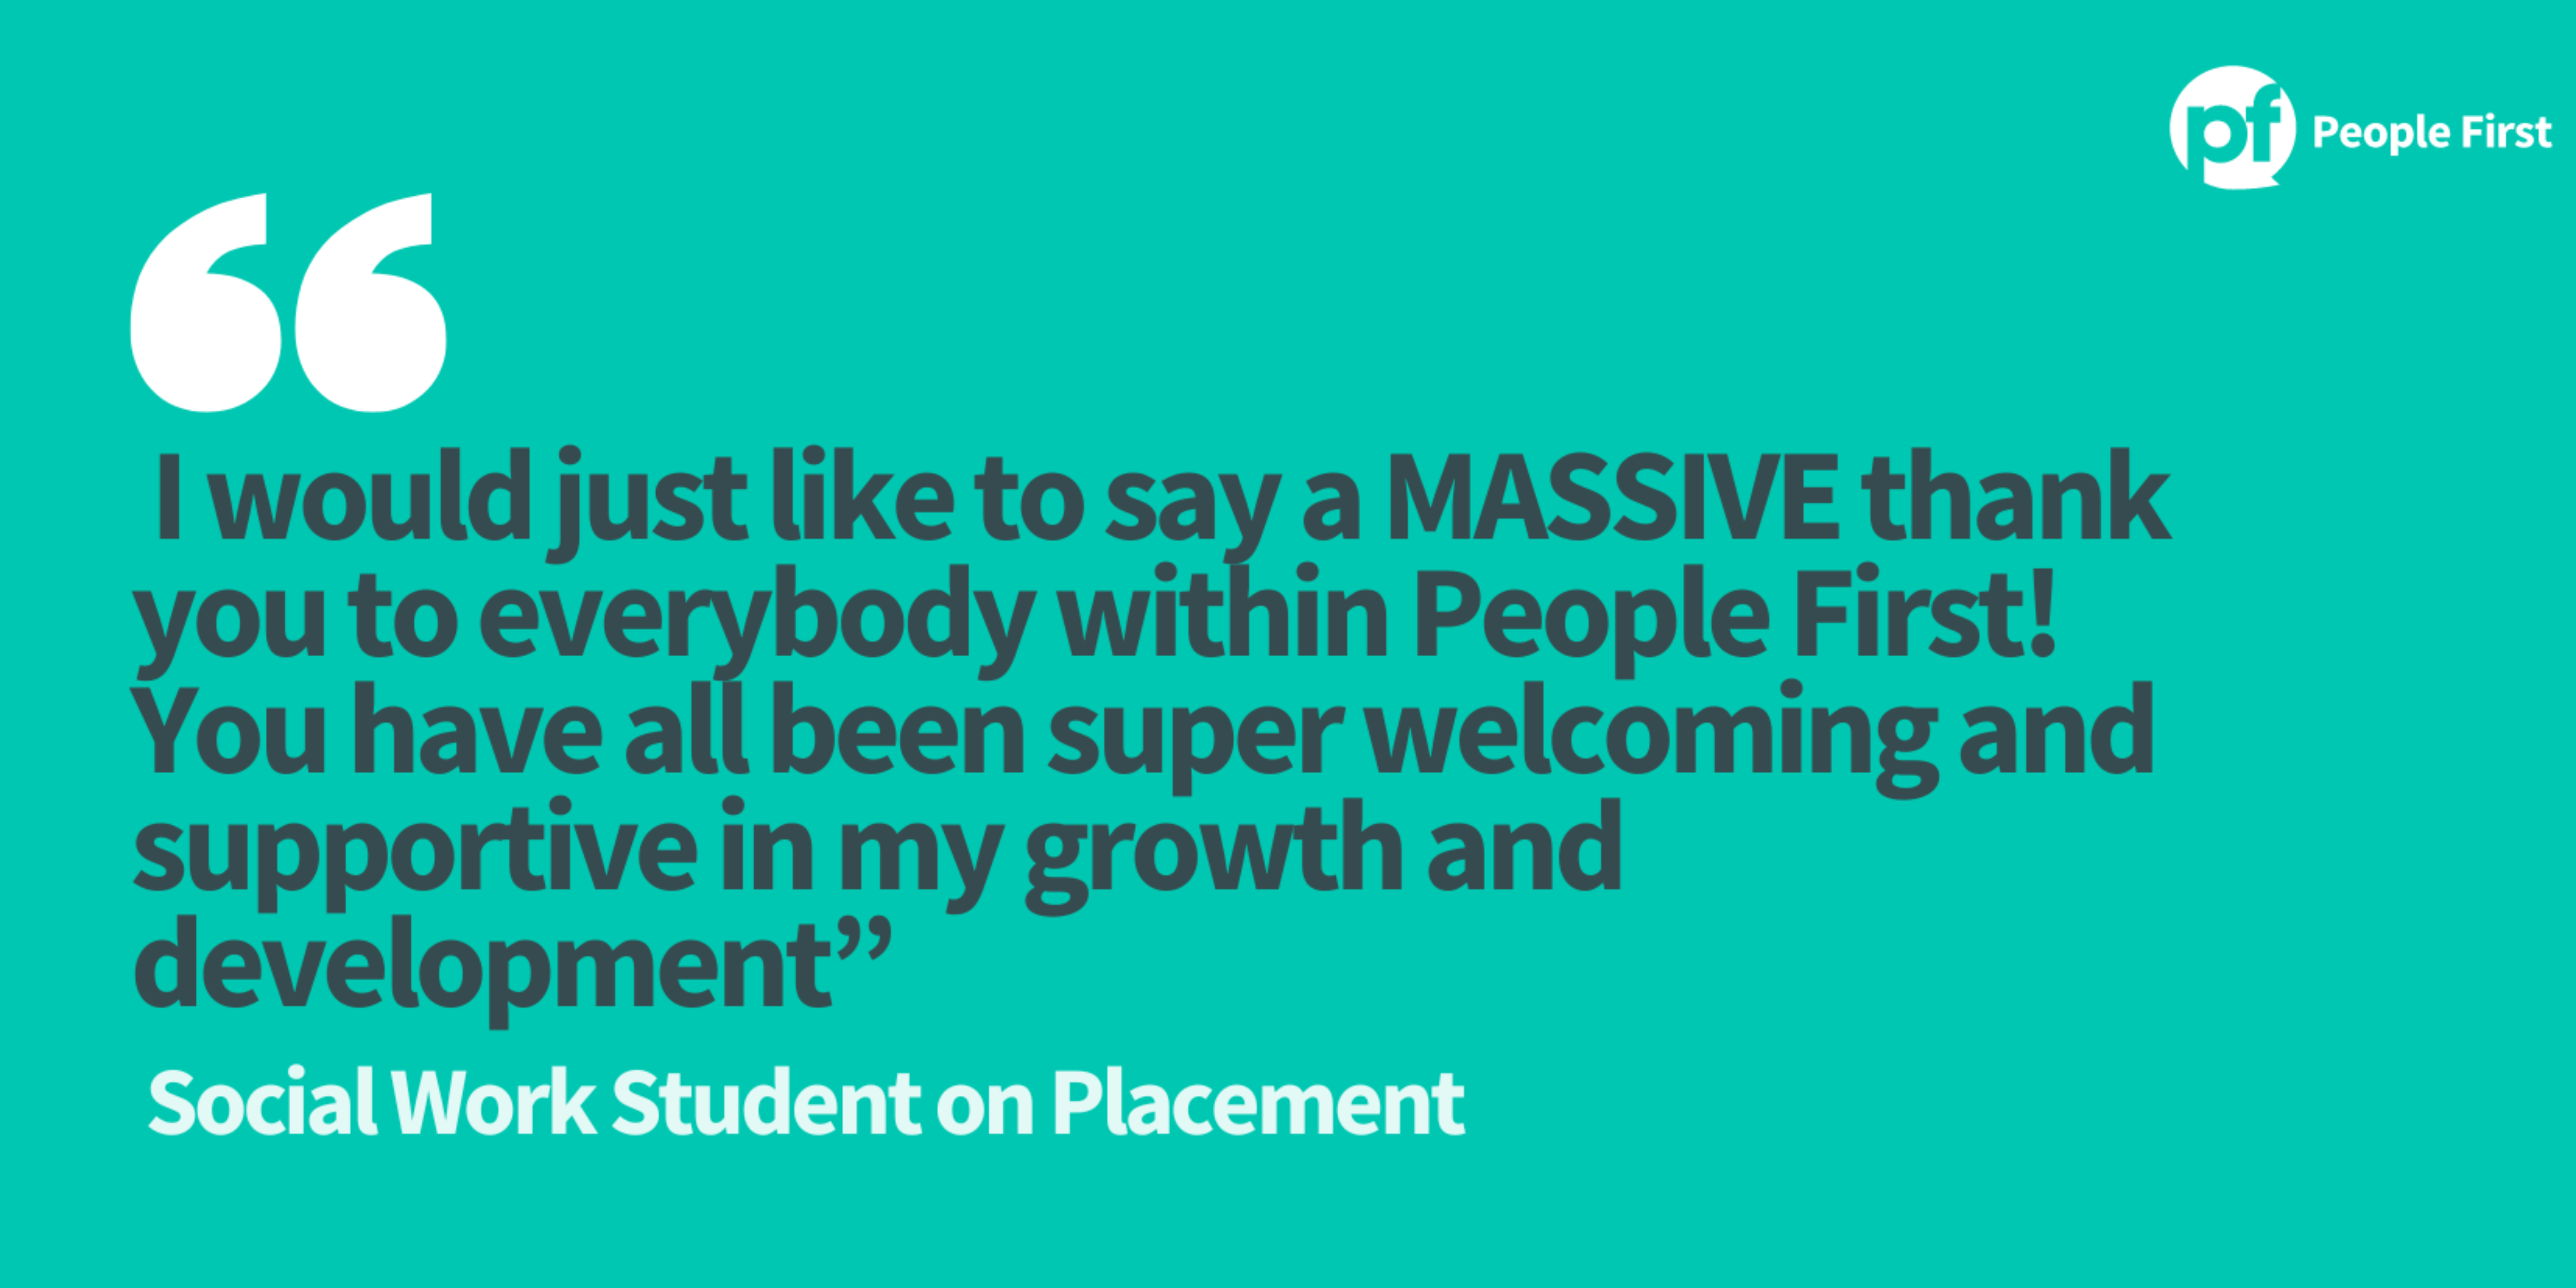 Social Work Student on Placement